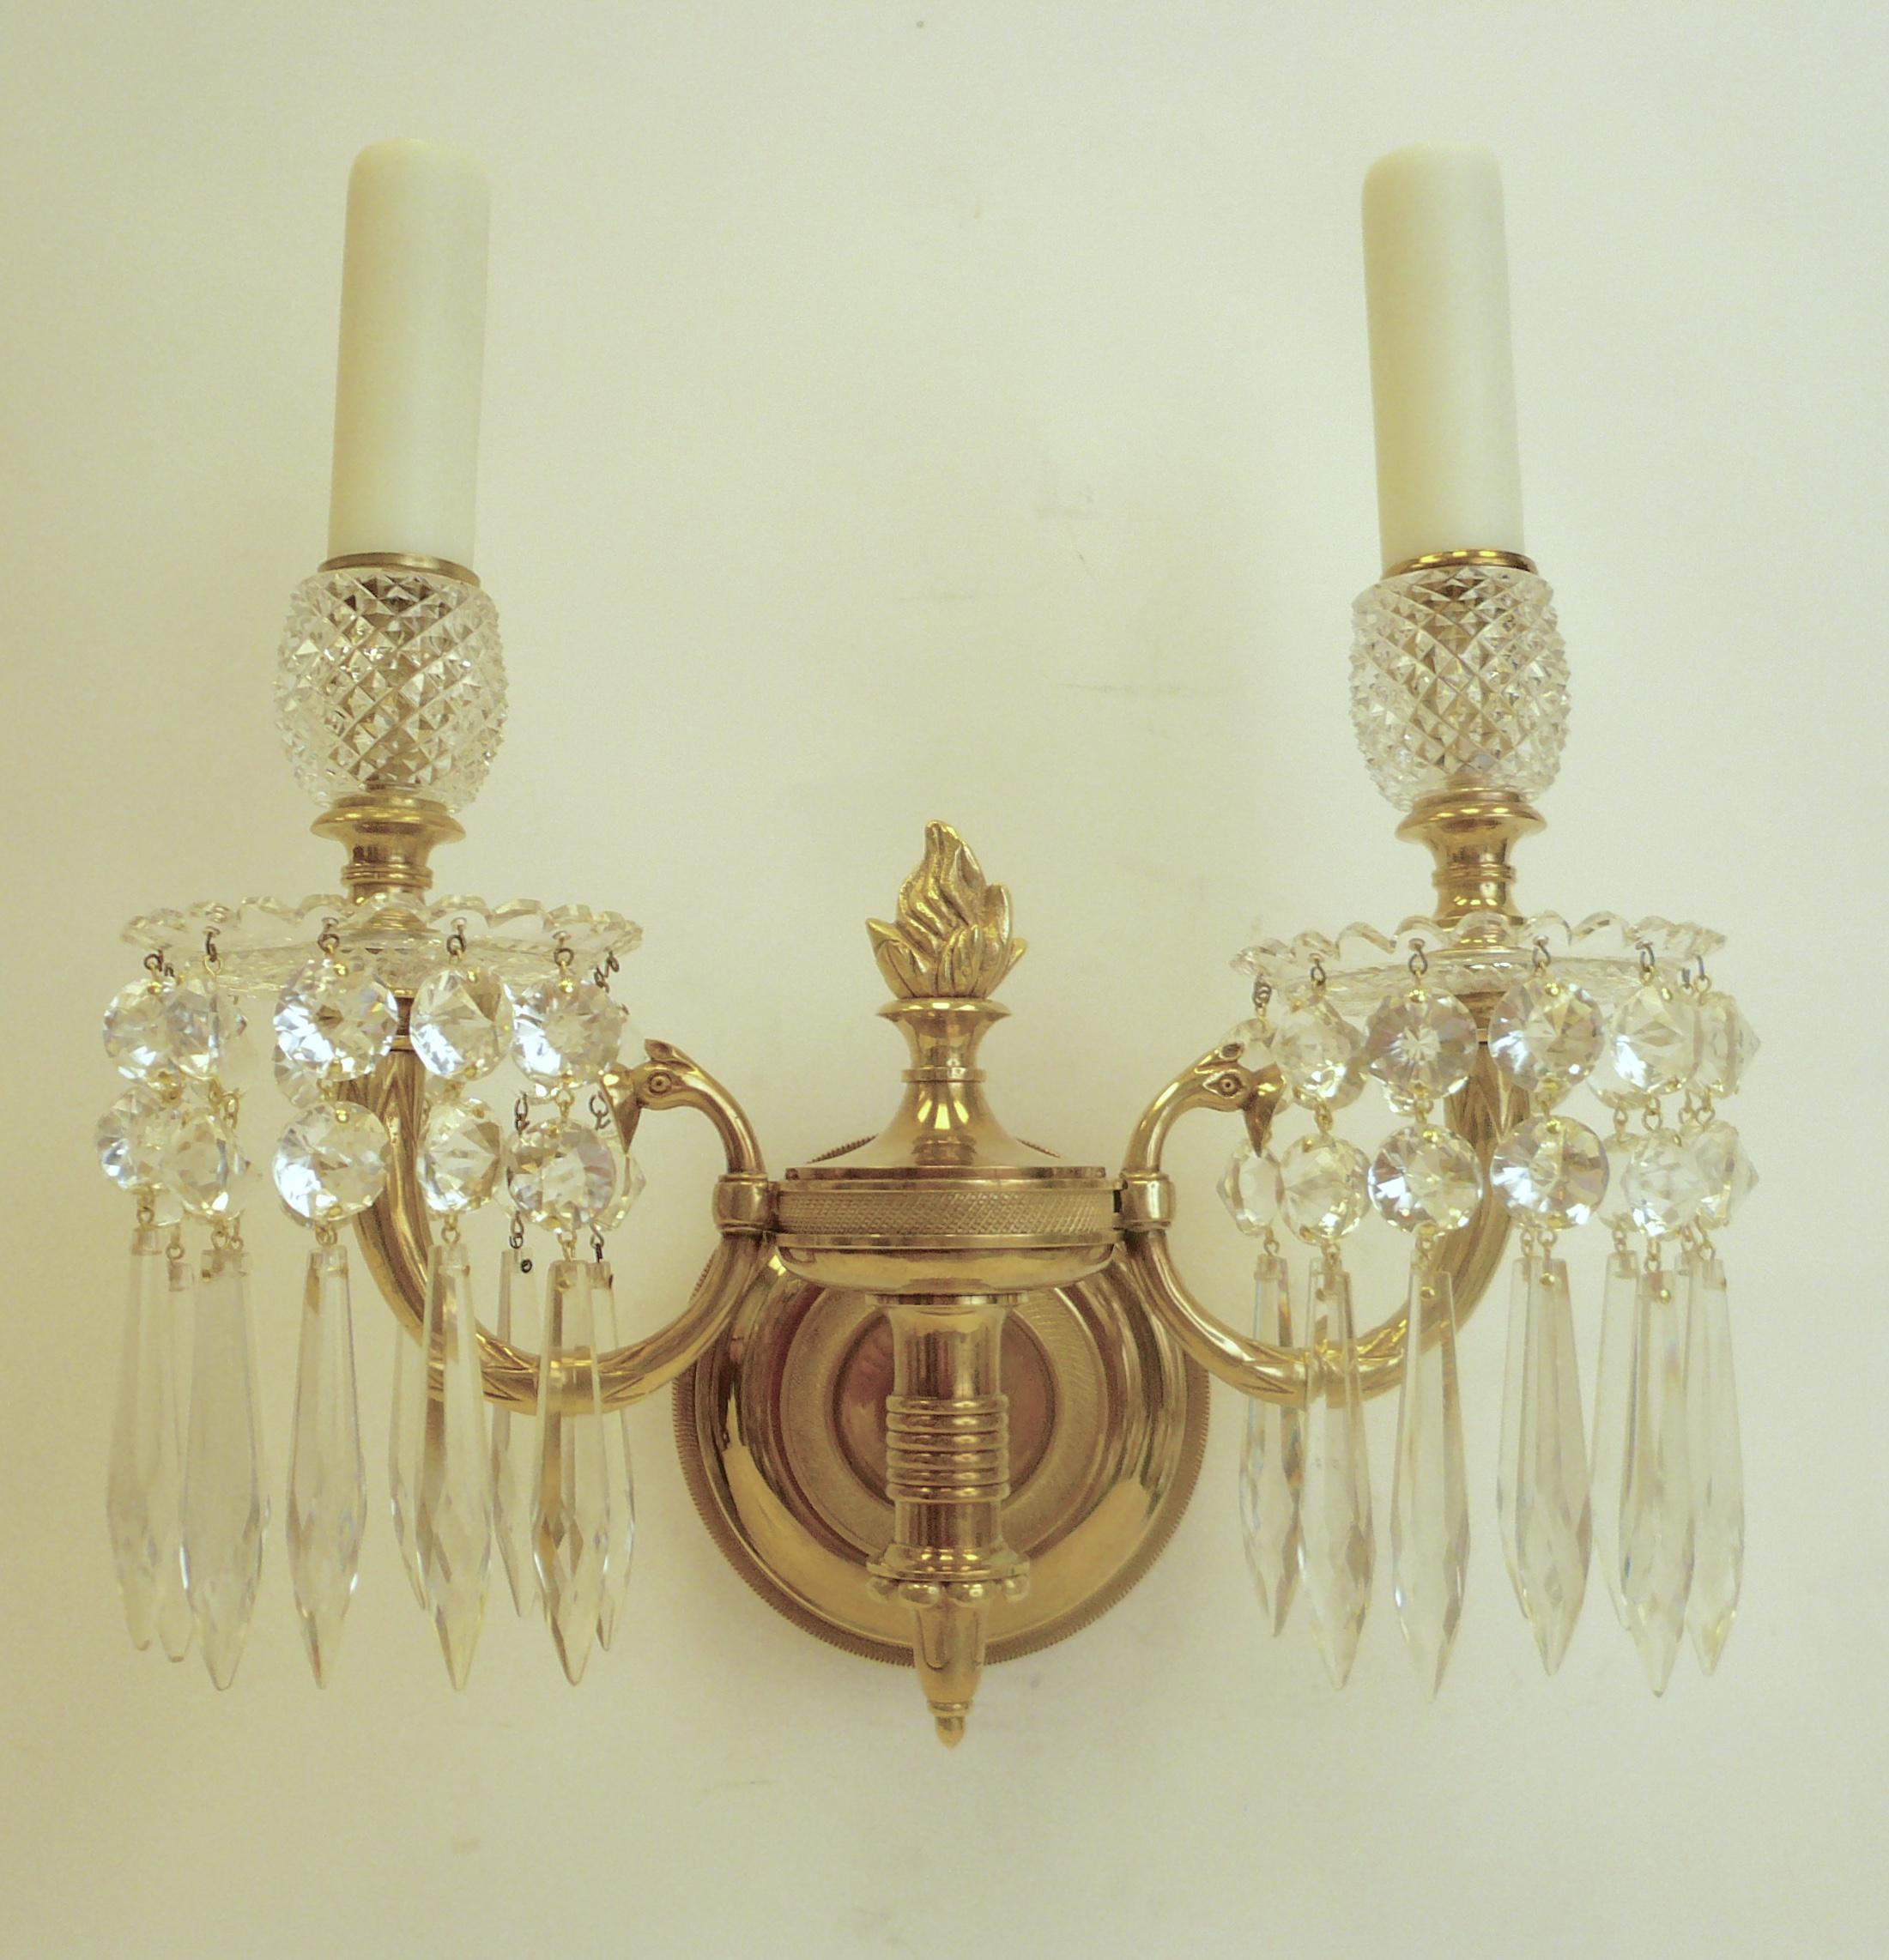 English Set of Four Regency Style Bronze and Crystal Sconces by Perry & Co.